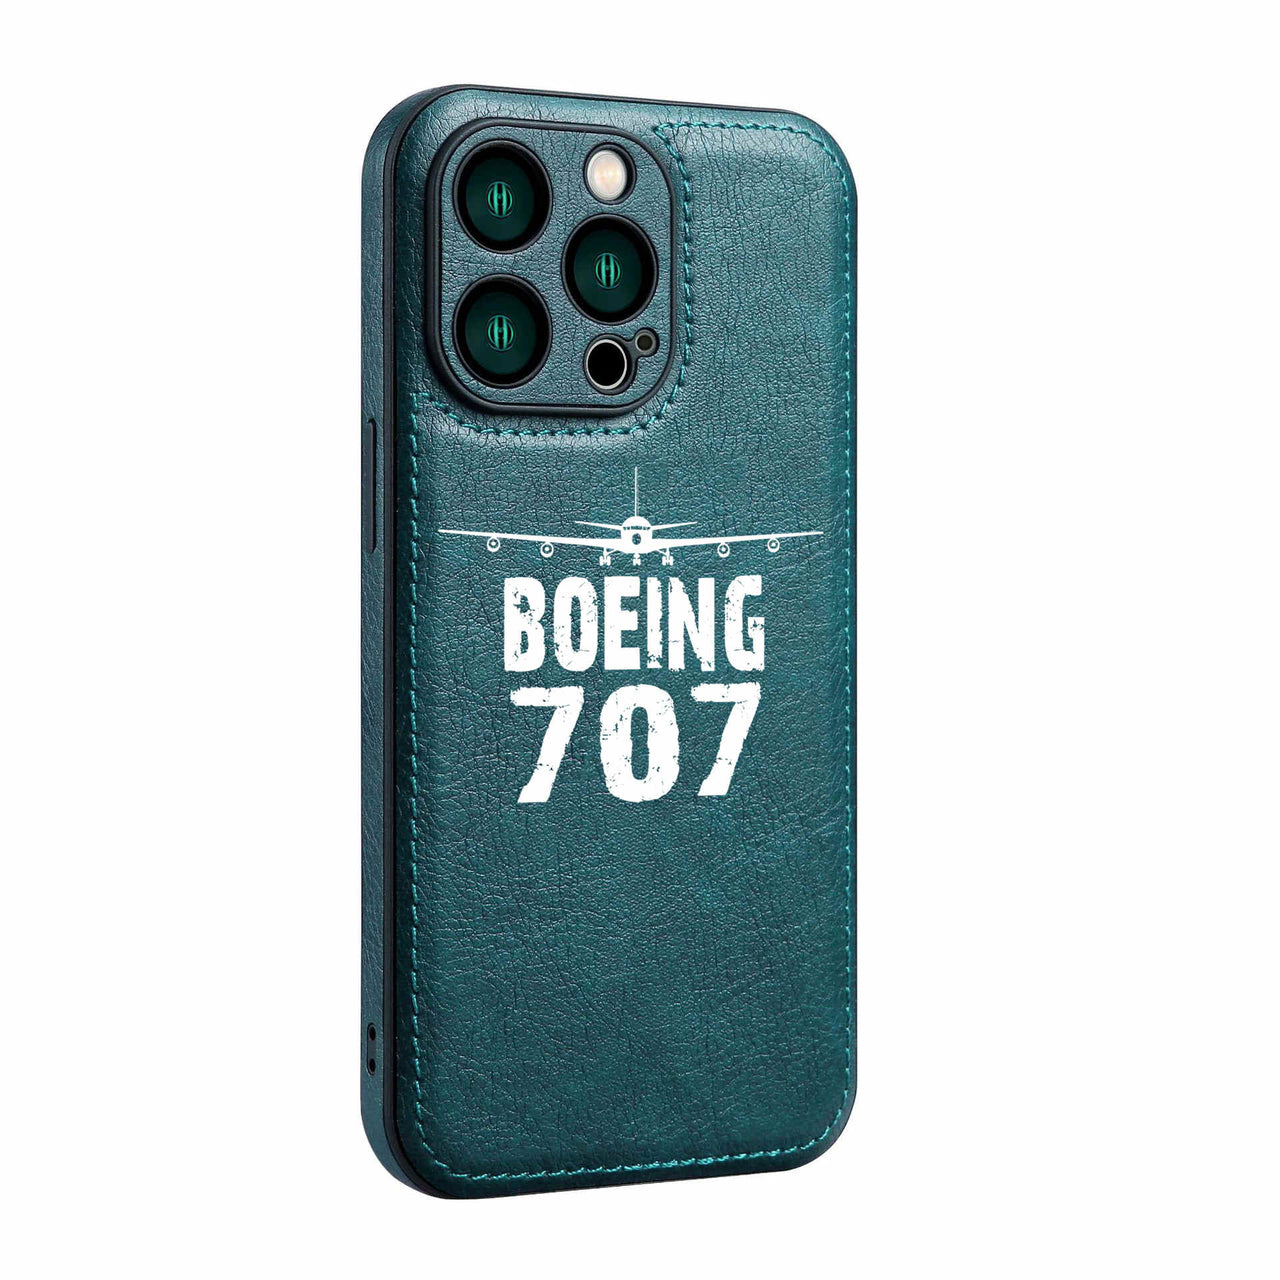 Boeing 707 & Plane Designed Leather iPhone Cases